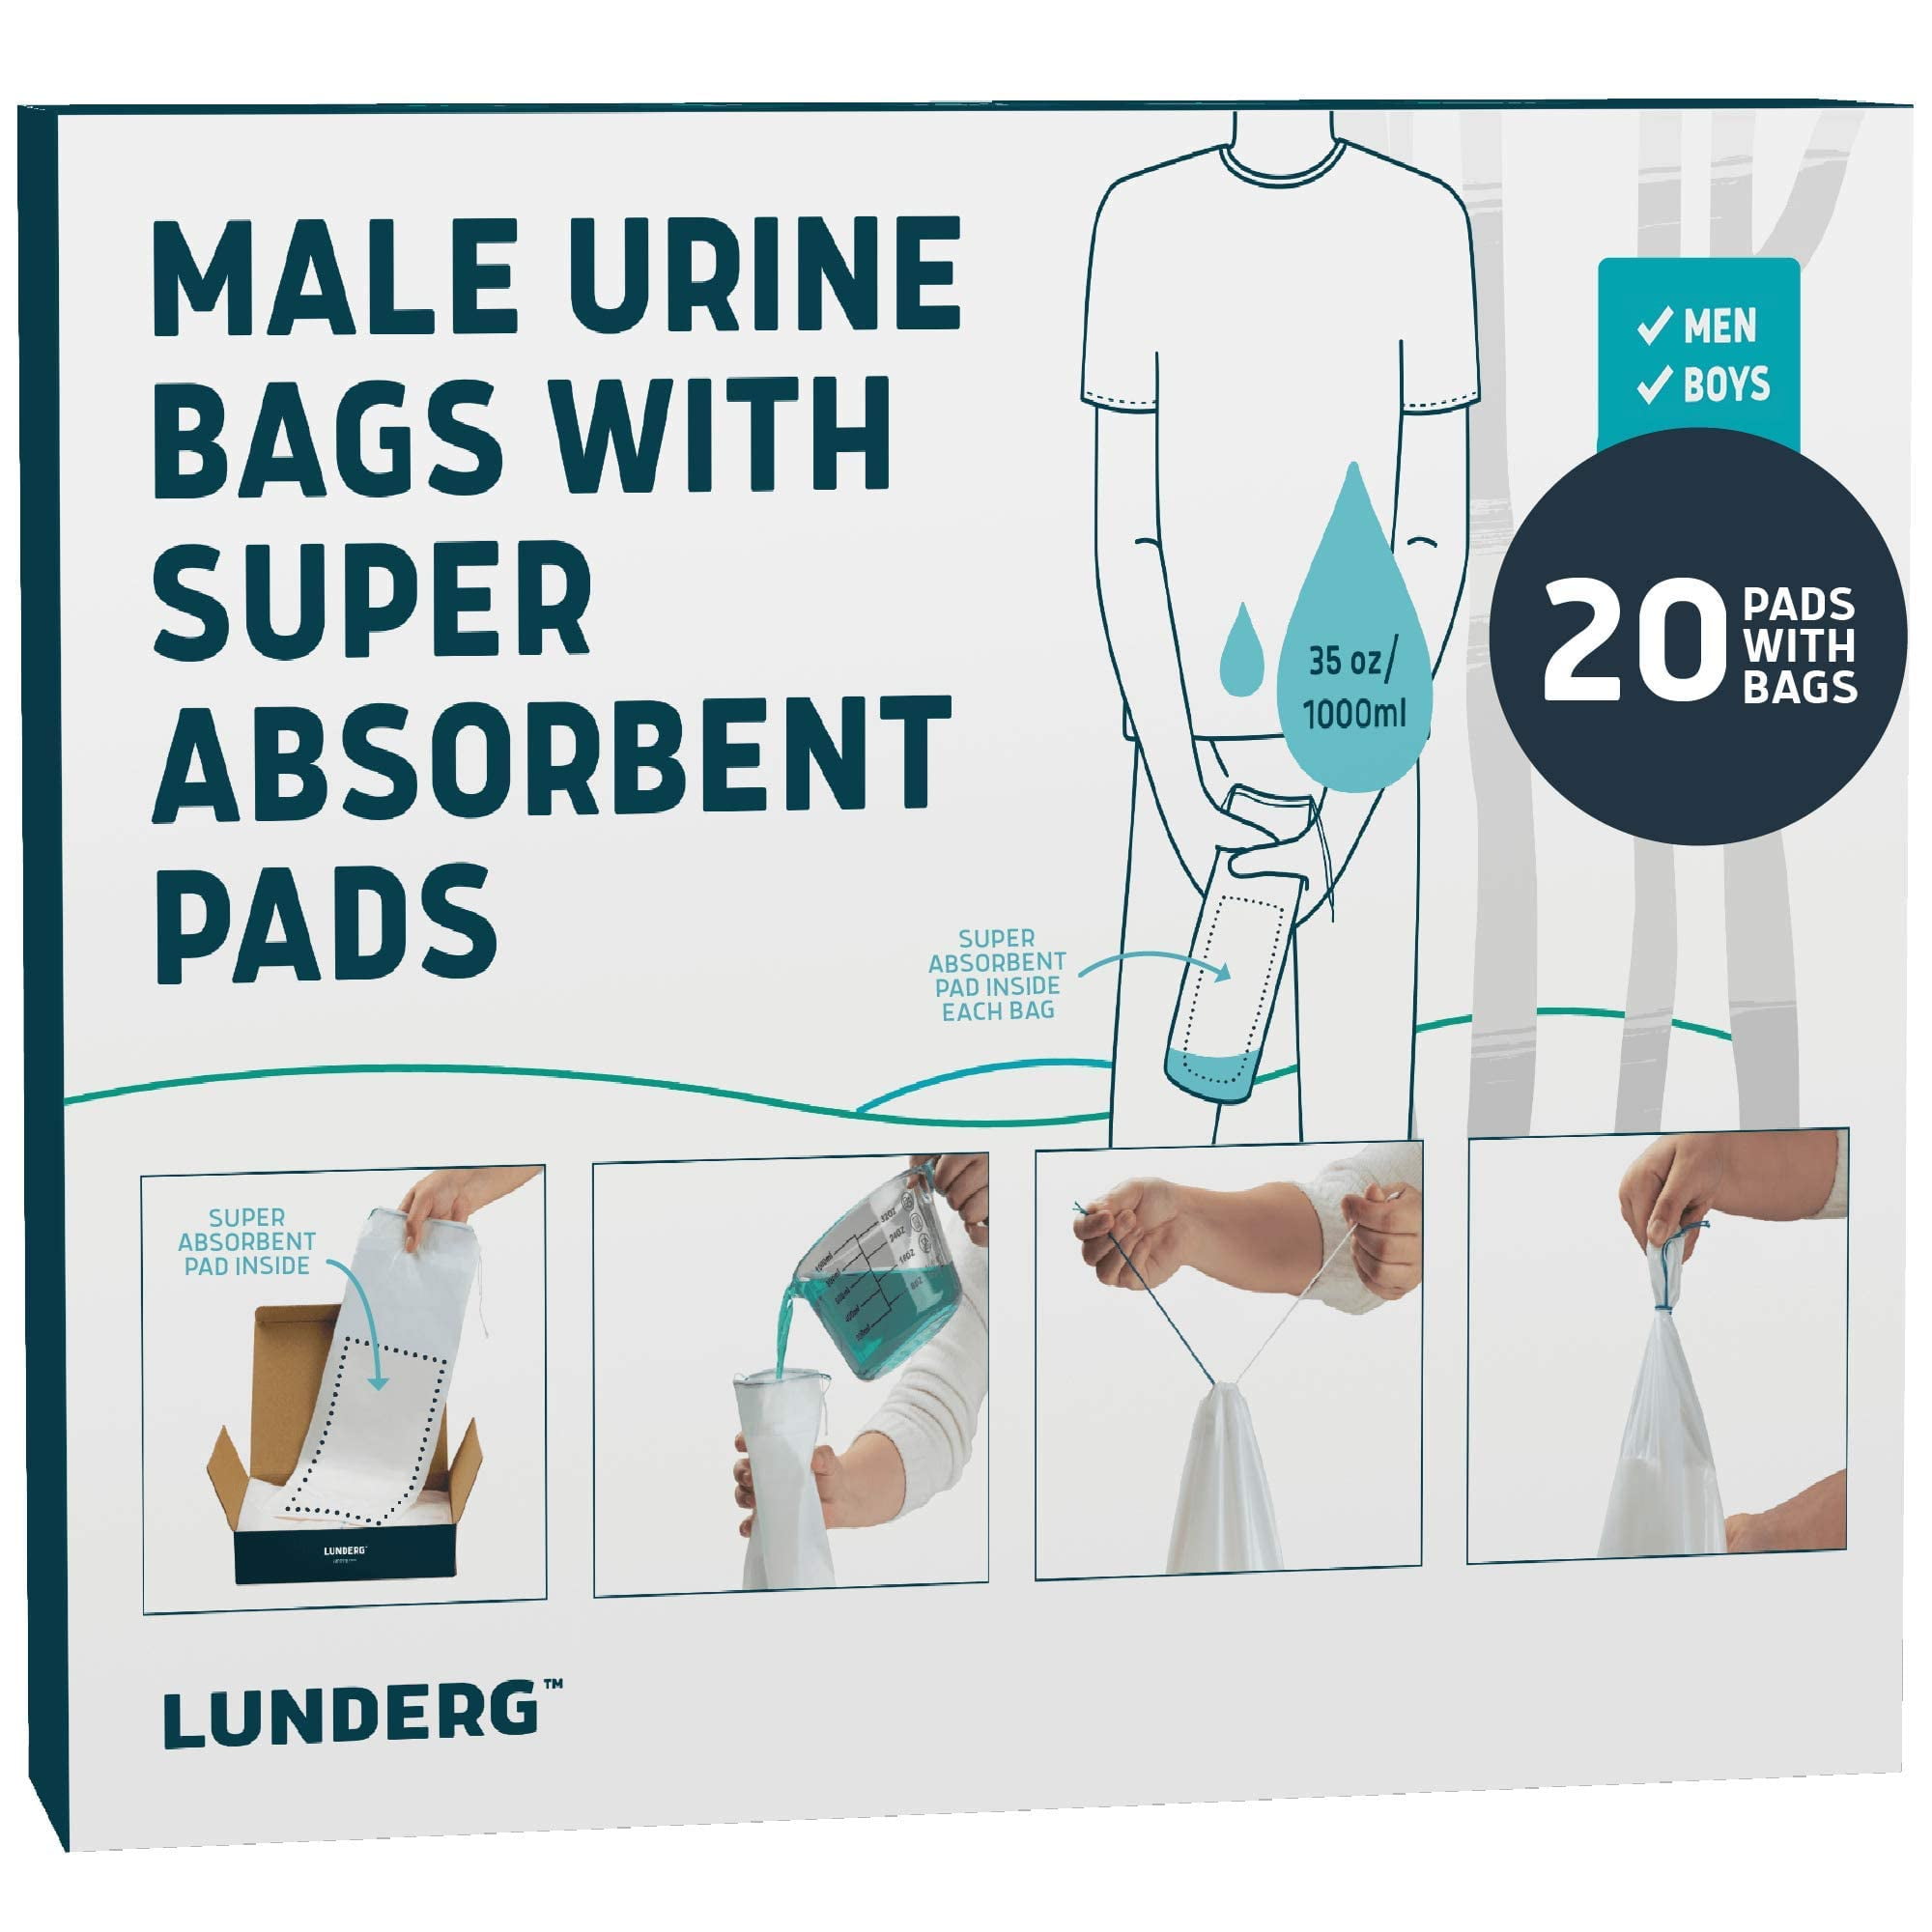 Lunderg Disposable Urine Bags Men Super Absorbent Pad Value Pack 20 Count Portable For travel Car Pee Bag Pocket Toilet Emergency Camping Help Yourse ec4dbeec fff5 4788 92e9 041d08f0b94f.f5d7179bc0b0be92802b215b759da1d6